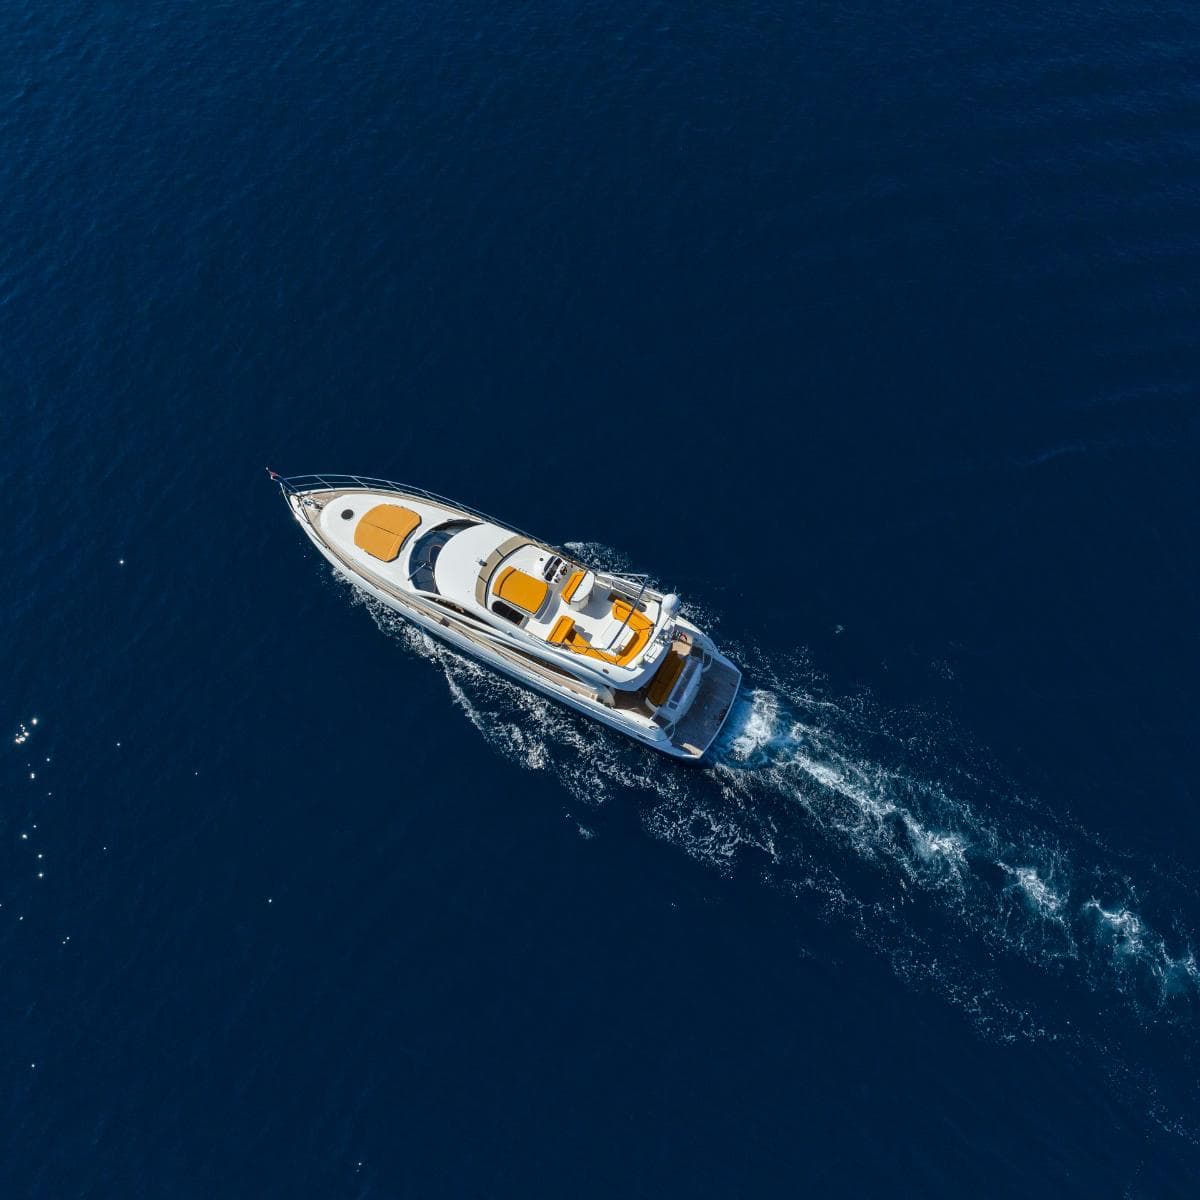 Aerial view of a yacht on a blue sea.